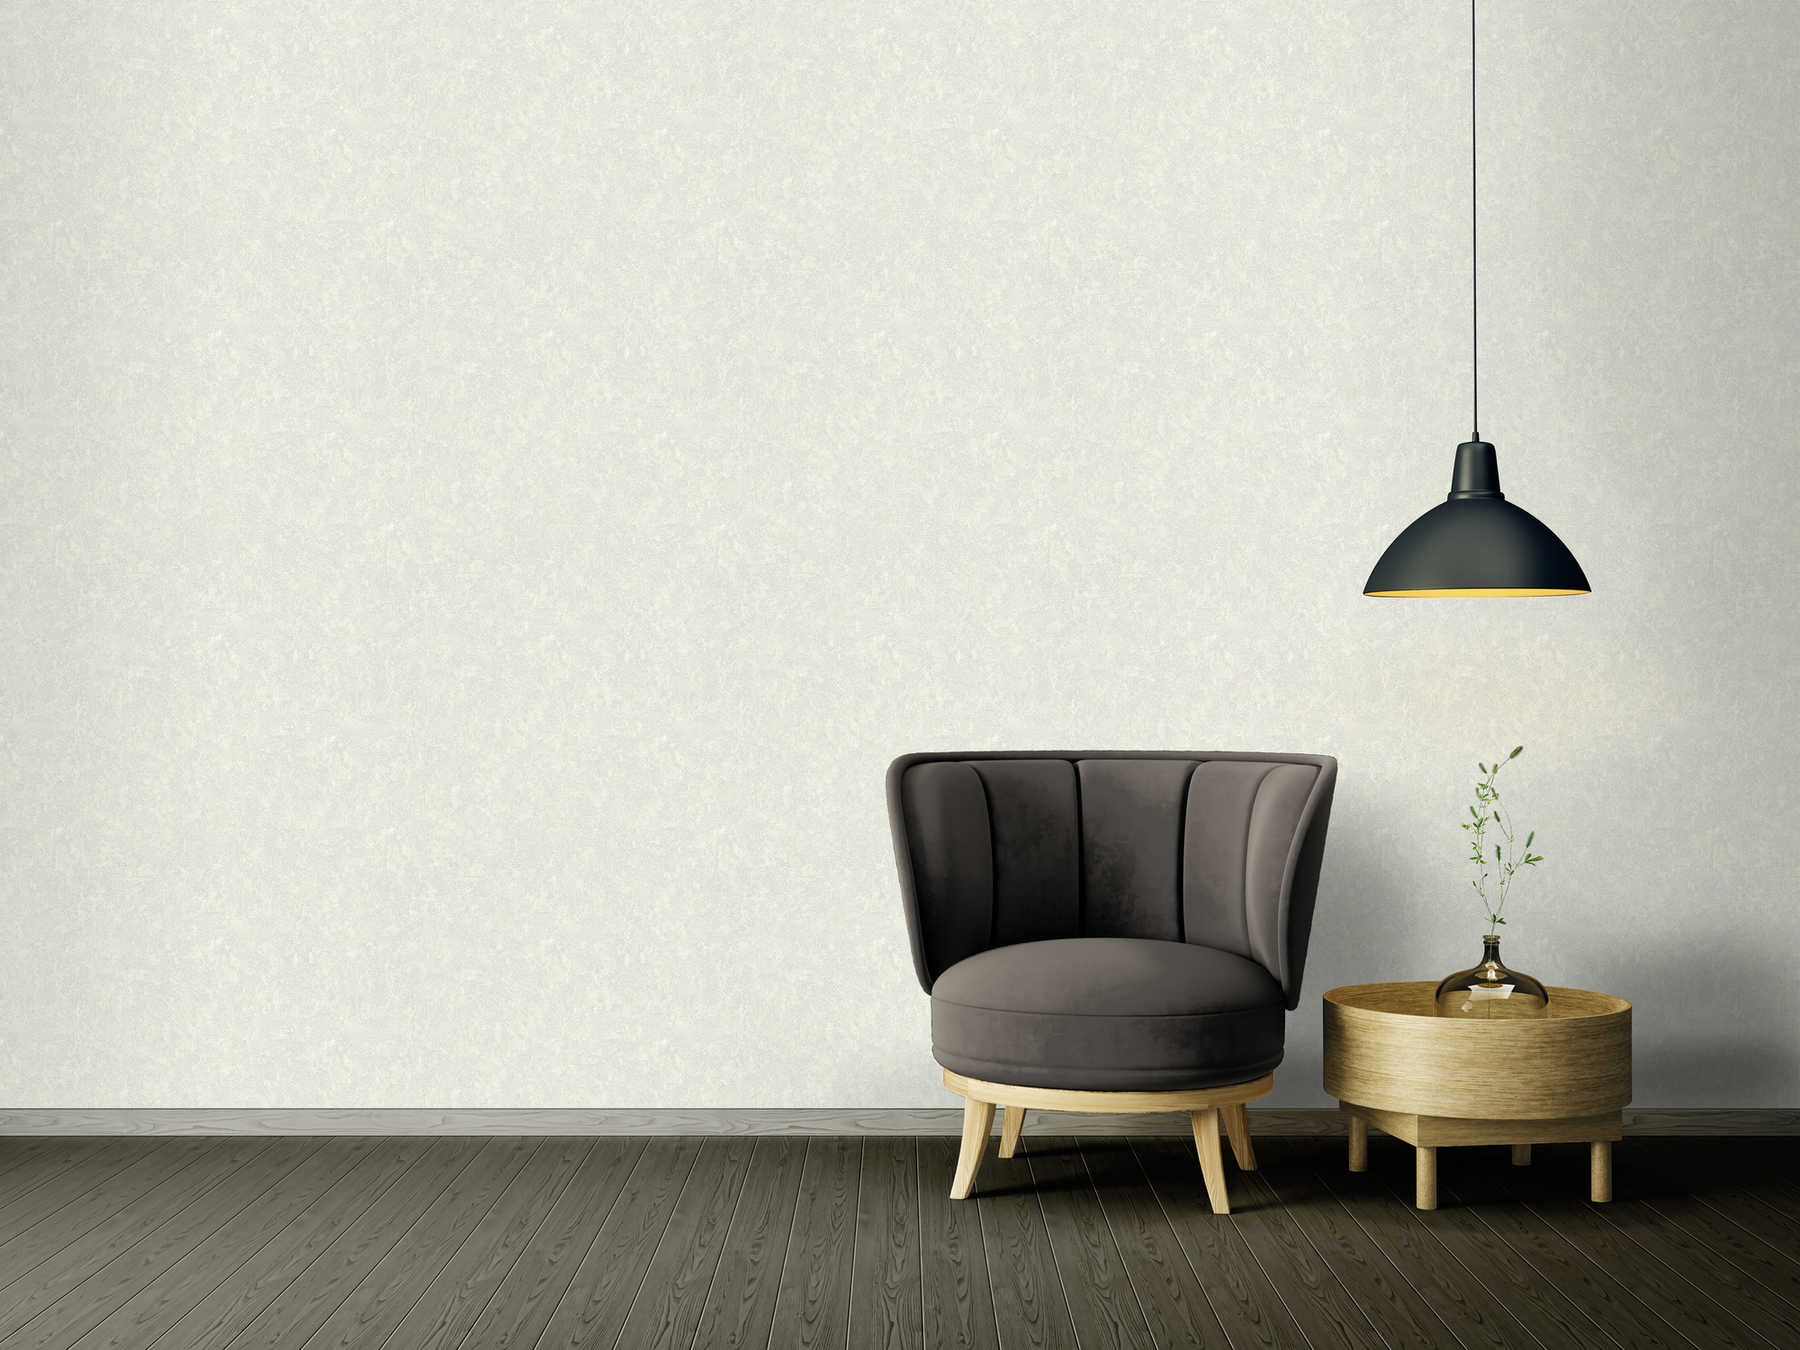             Wallpaper wall plaster look with texture effect & mottled colour - grey
        